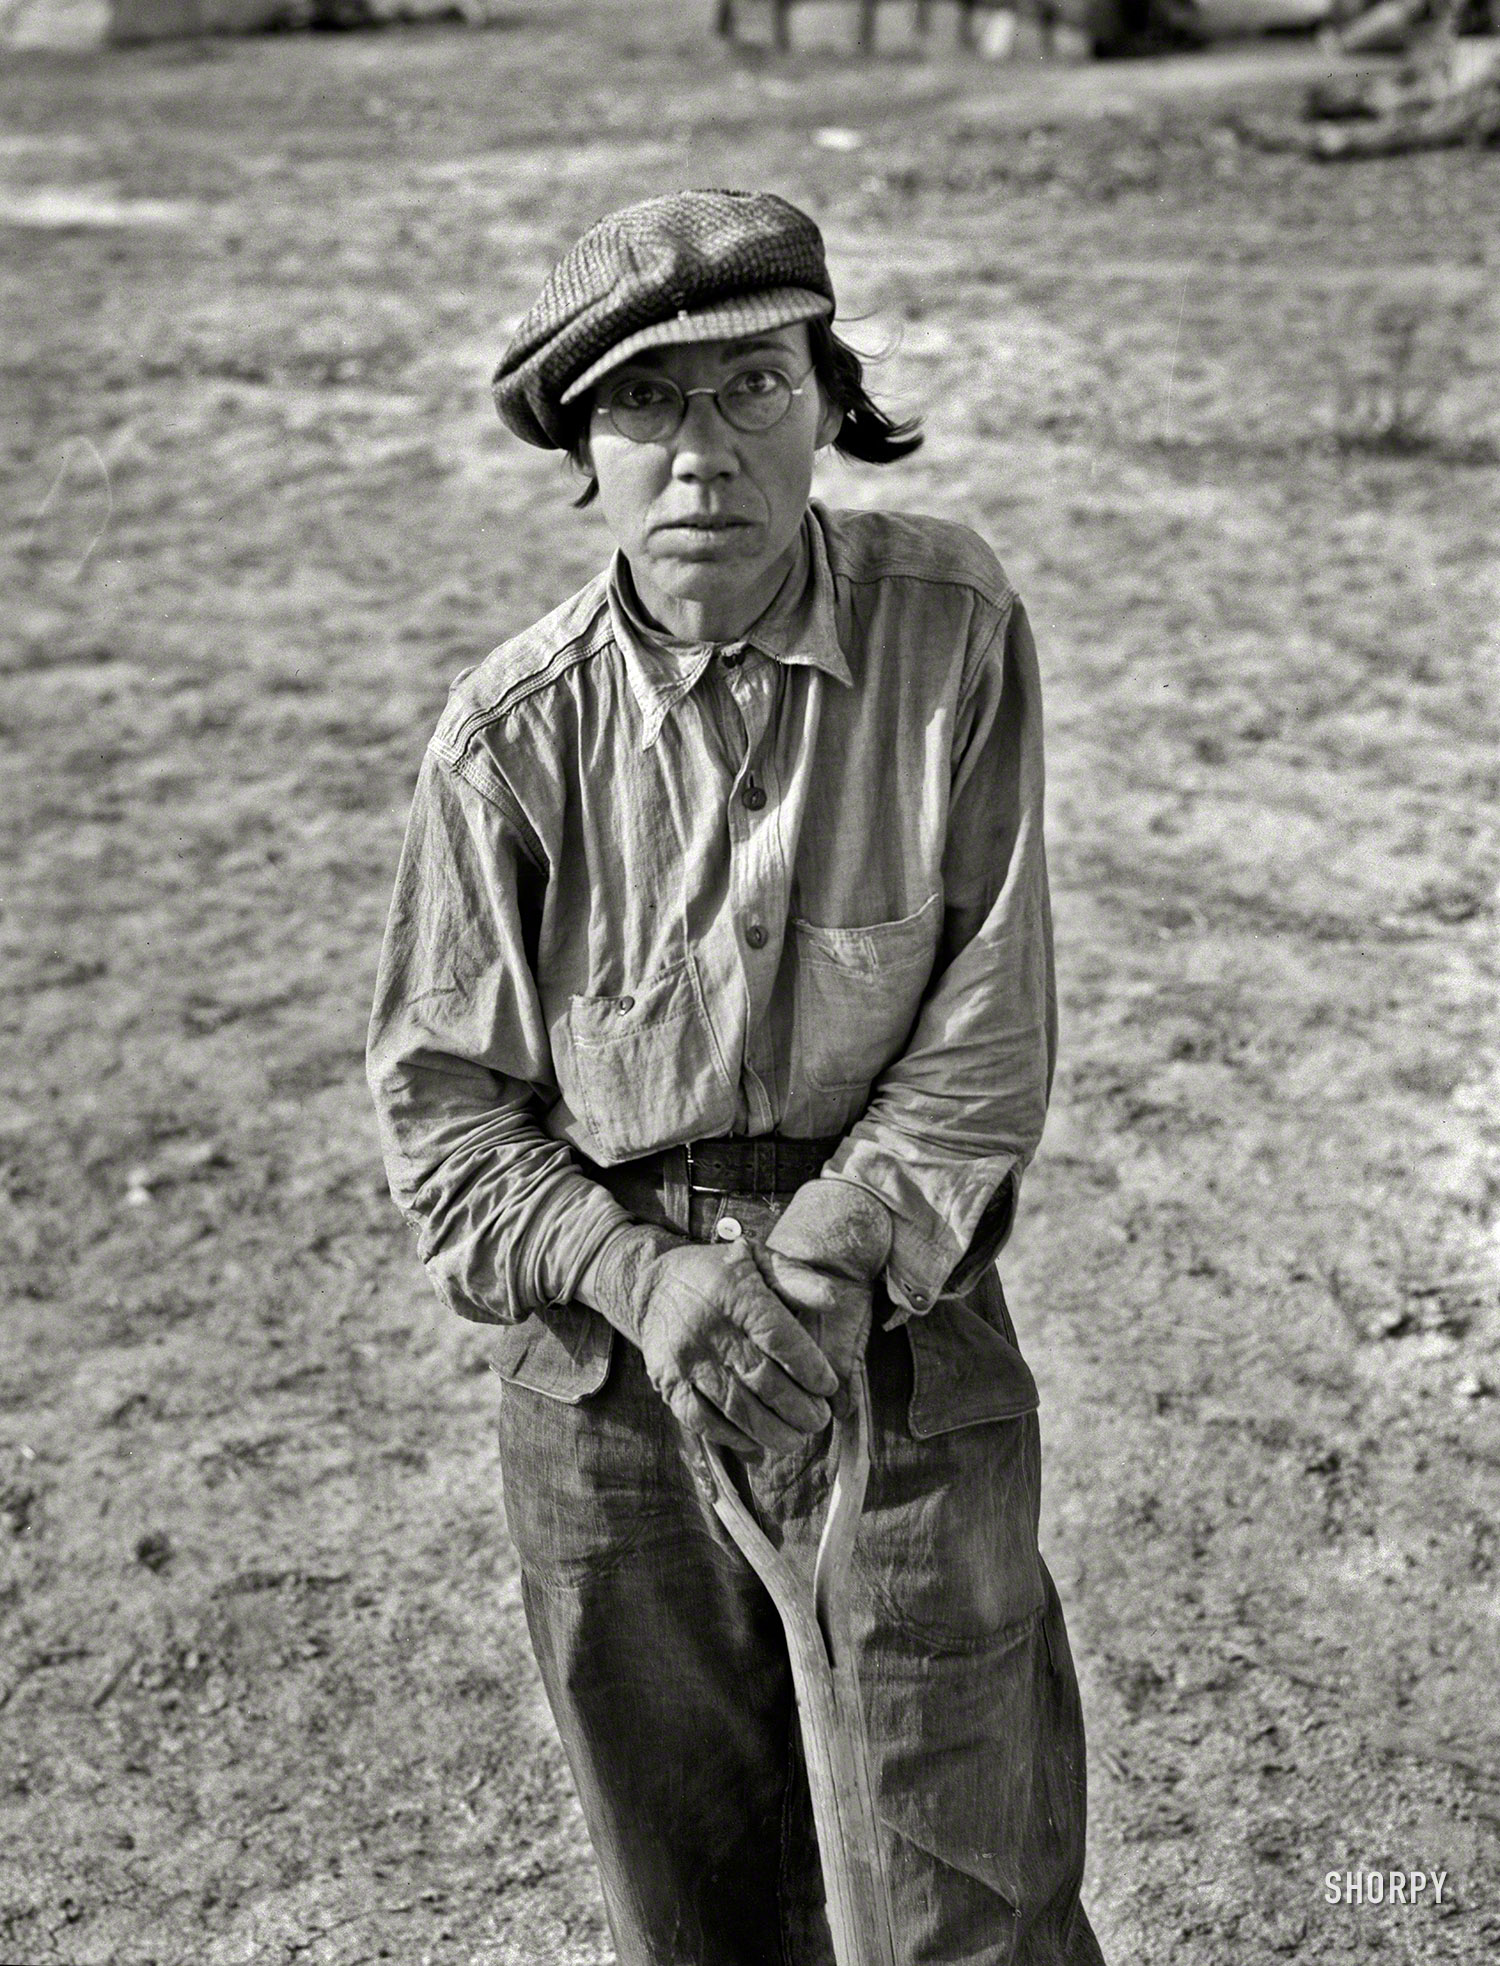 February 1937. Calipatria, California. Native of Indiana in a migratory labor contractor's camp. "It's root hog or die for us folks." Large format negative by Dorothea Lange for the Resettlement Administration. View full size.